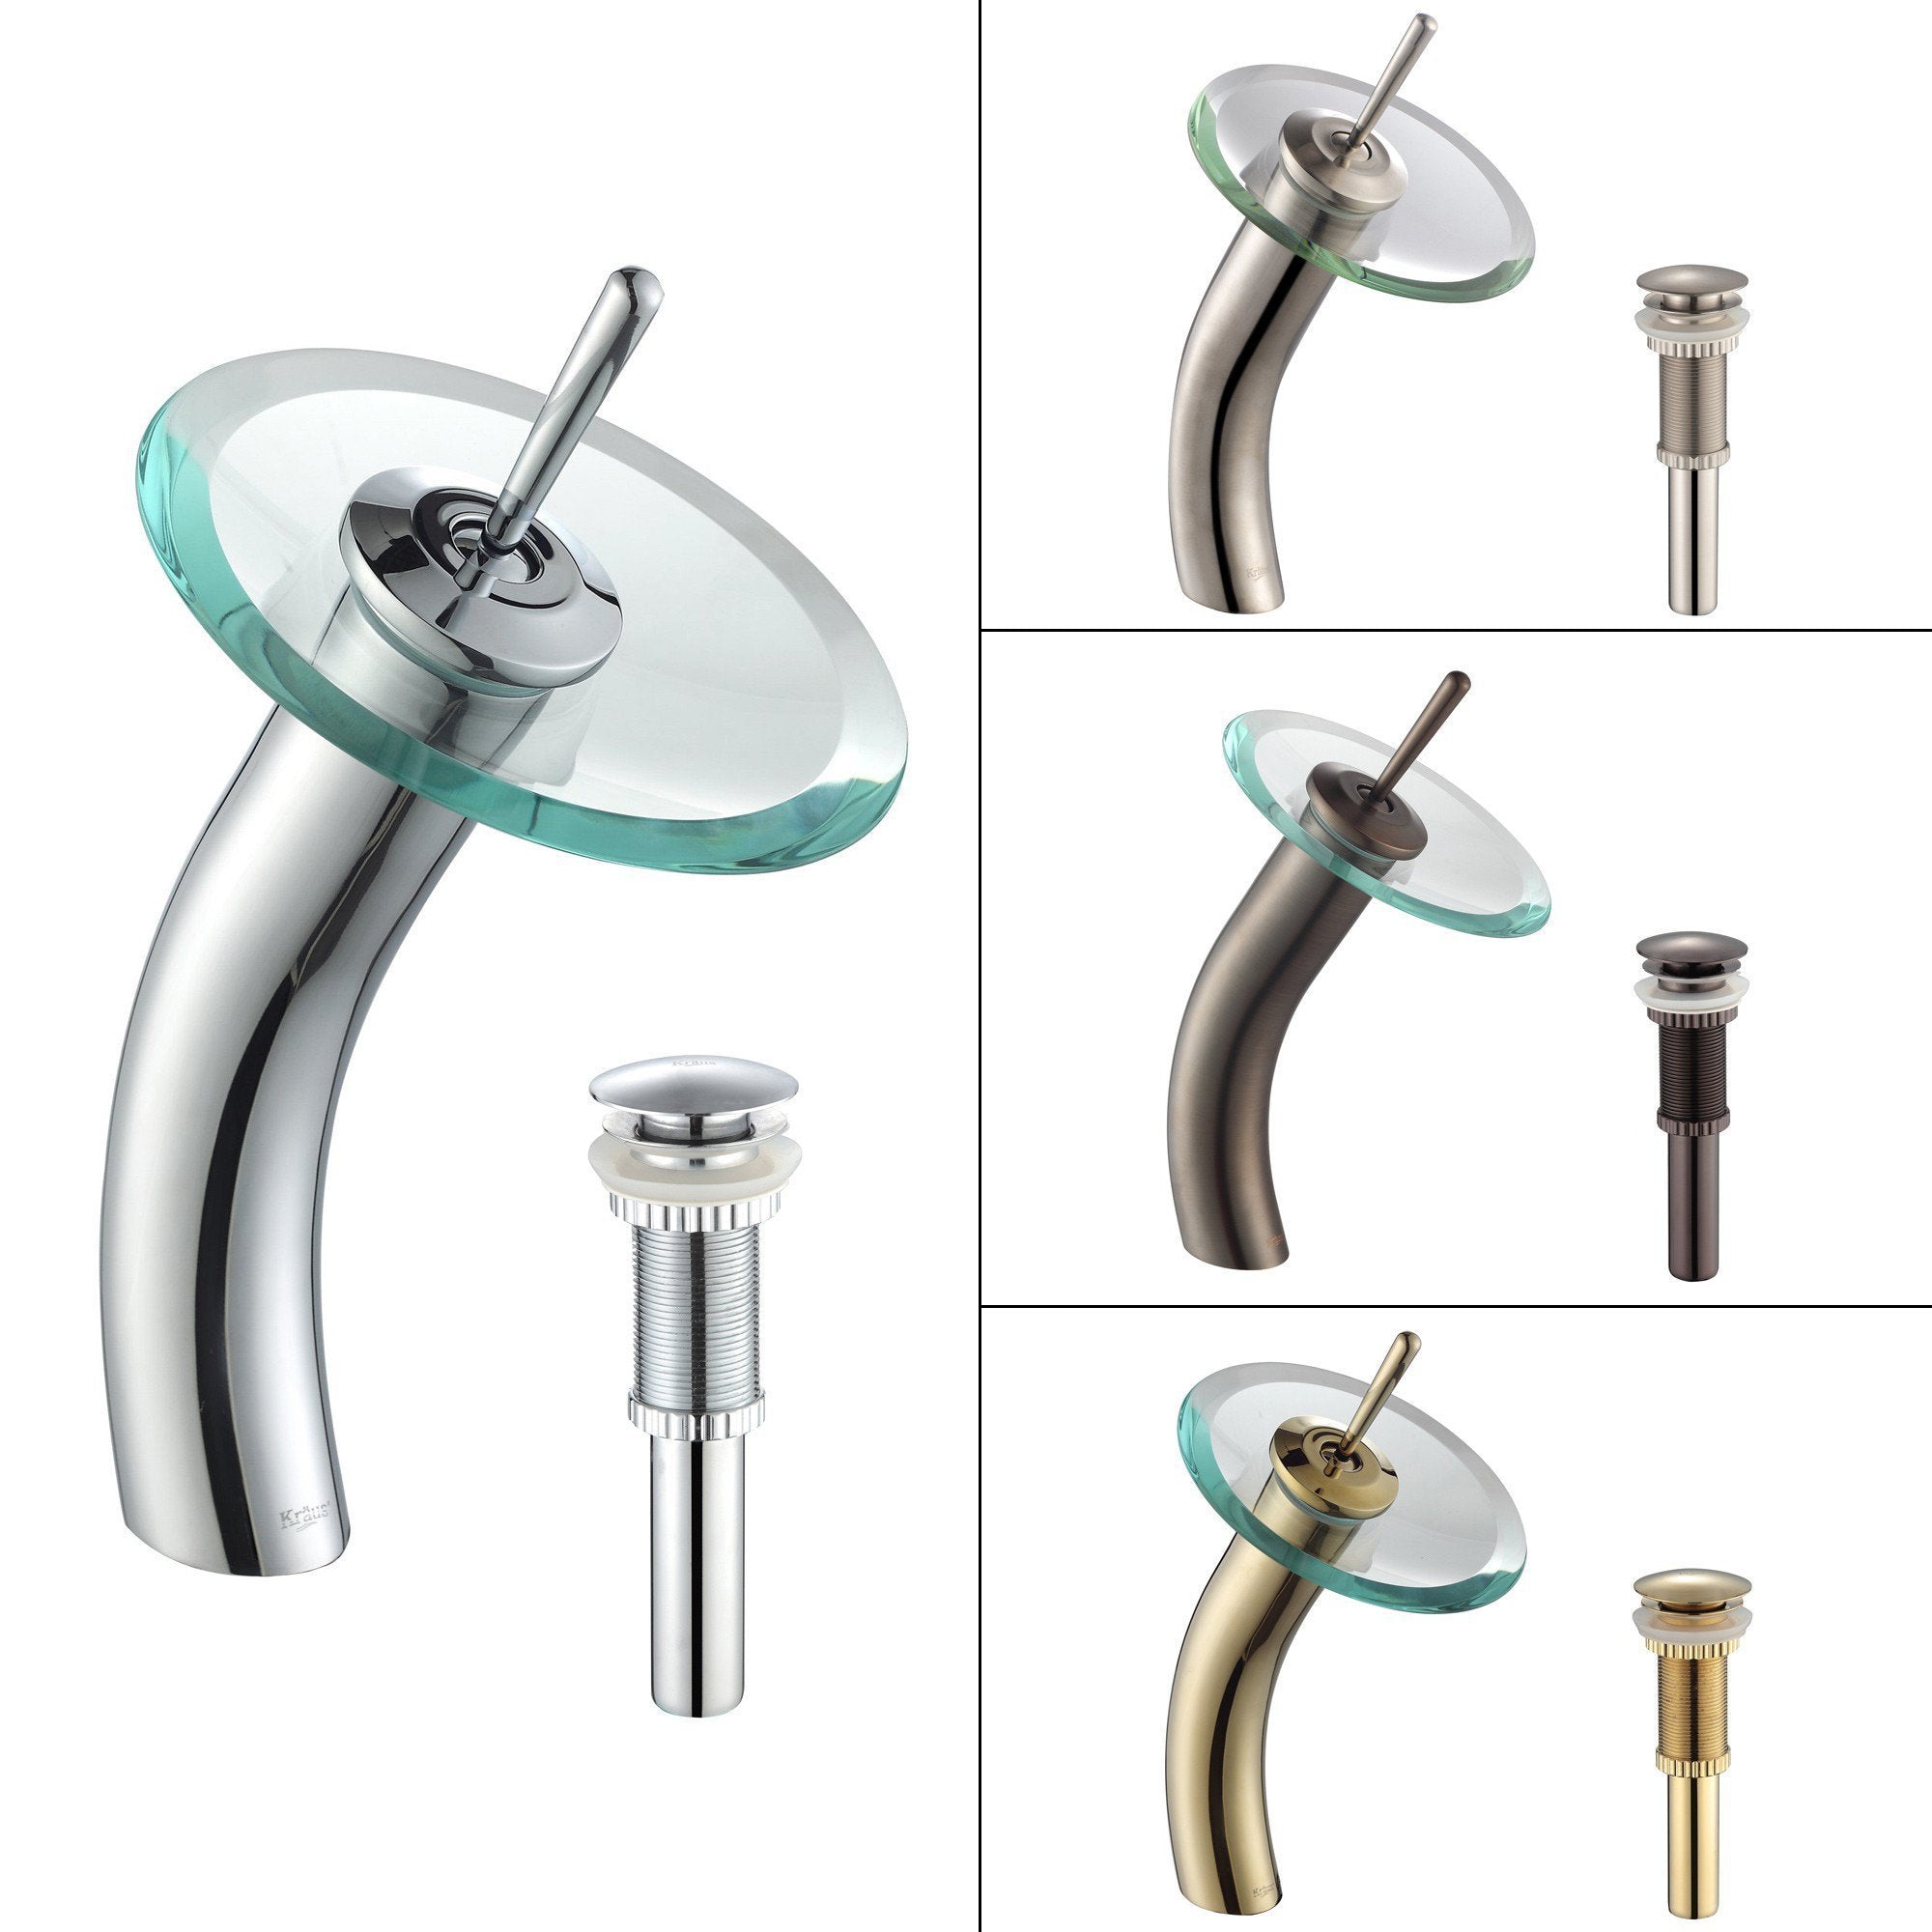 KRAUS Single Lever Vessel Glass Waterfall Bathroom Faucet and Matching Pop Up Drain in Chrome and Frosted KGW-1700-PU-10CH-FR | DirectSinks